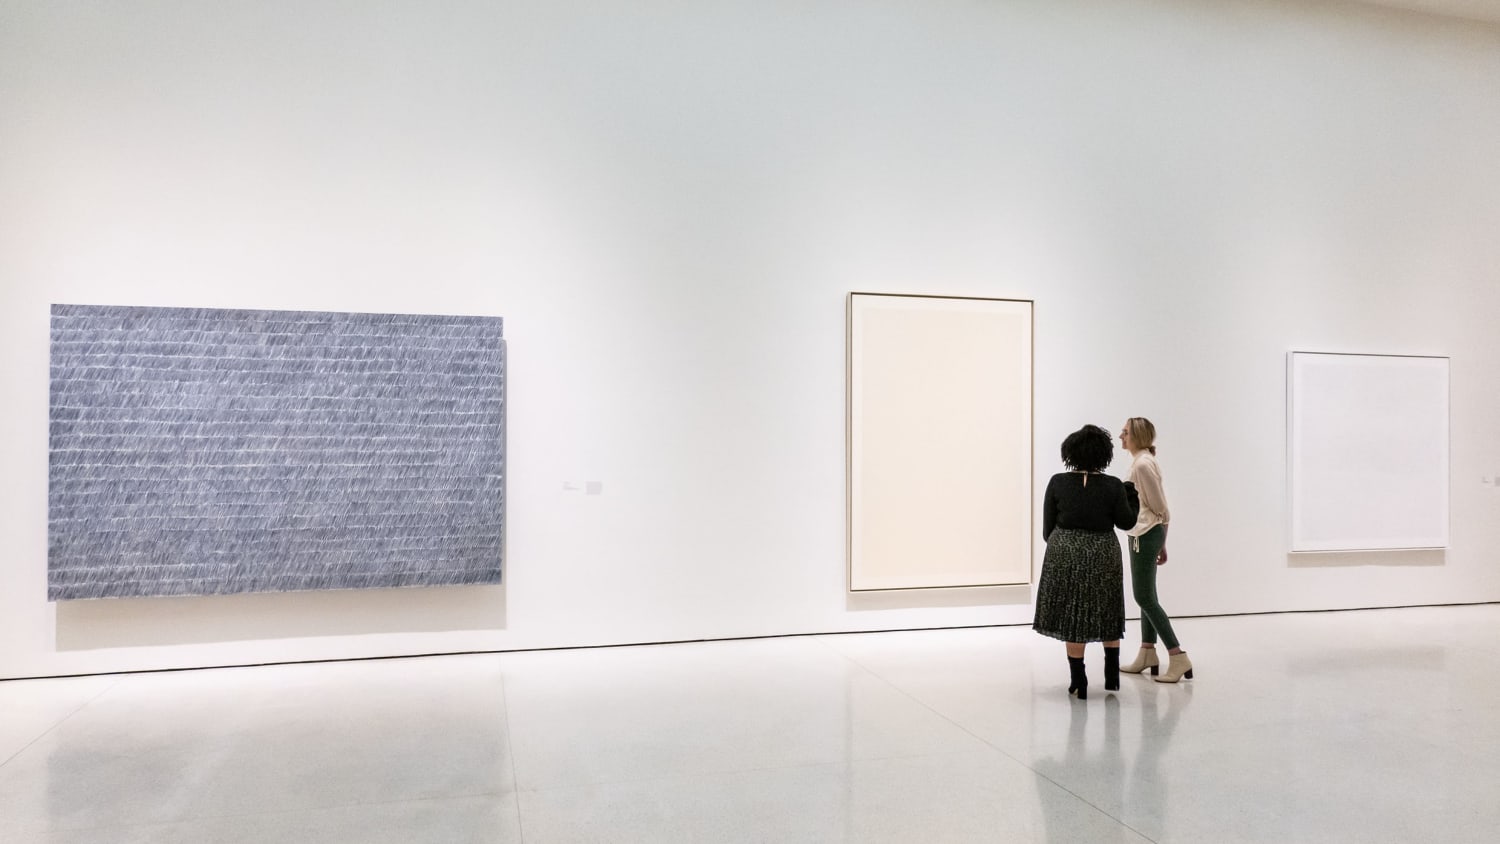 From left: Park Seo Bo, Ecriture No. 55-73, 1973; Chryssa, New York Times, 1975-78; and Jacob El Hanani, Untitled #171, 1976. Installation view, Marking Time: Process in Minimal Abstraction, Solomon R. Guggenheim Museum, New York, December 18, 2019-August 2, 2020. Photo: David Heald.